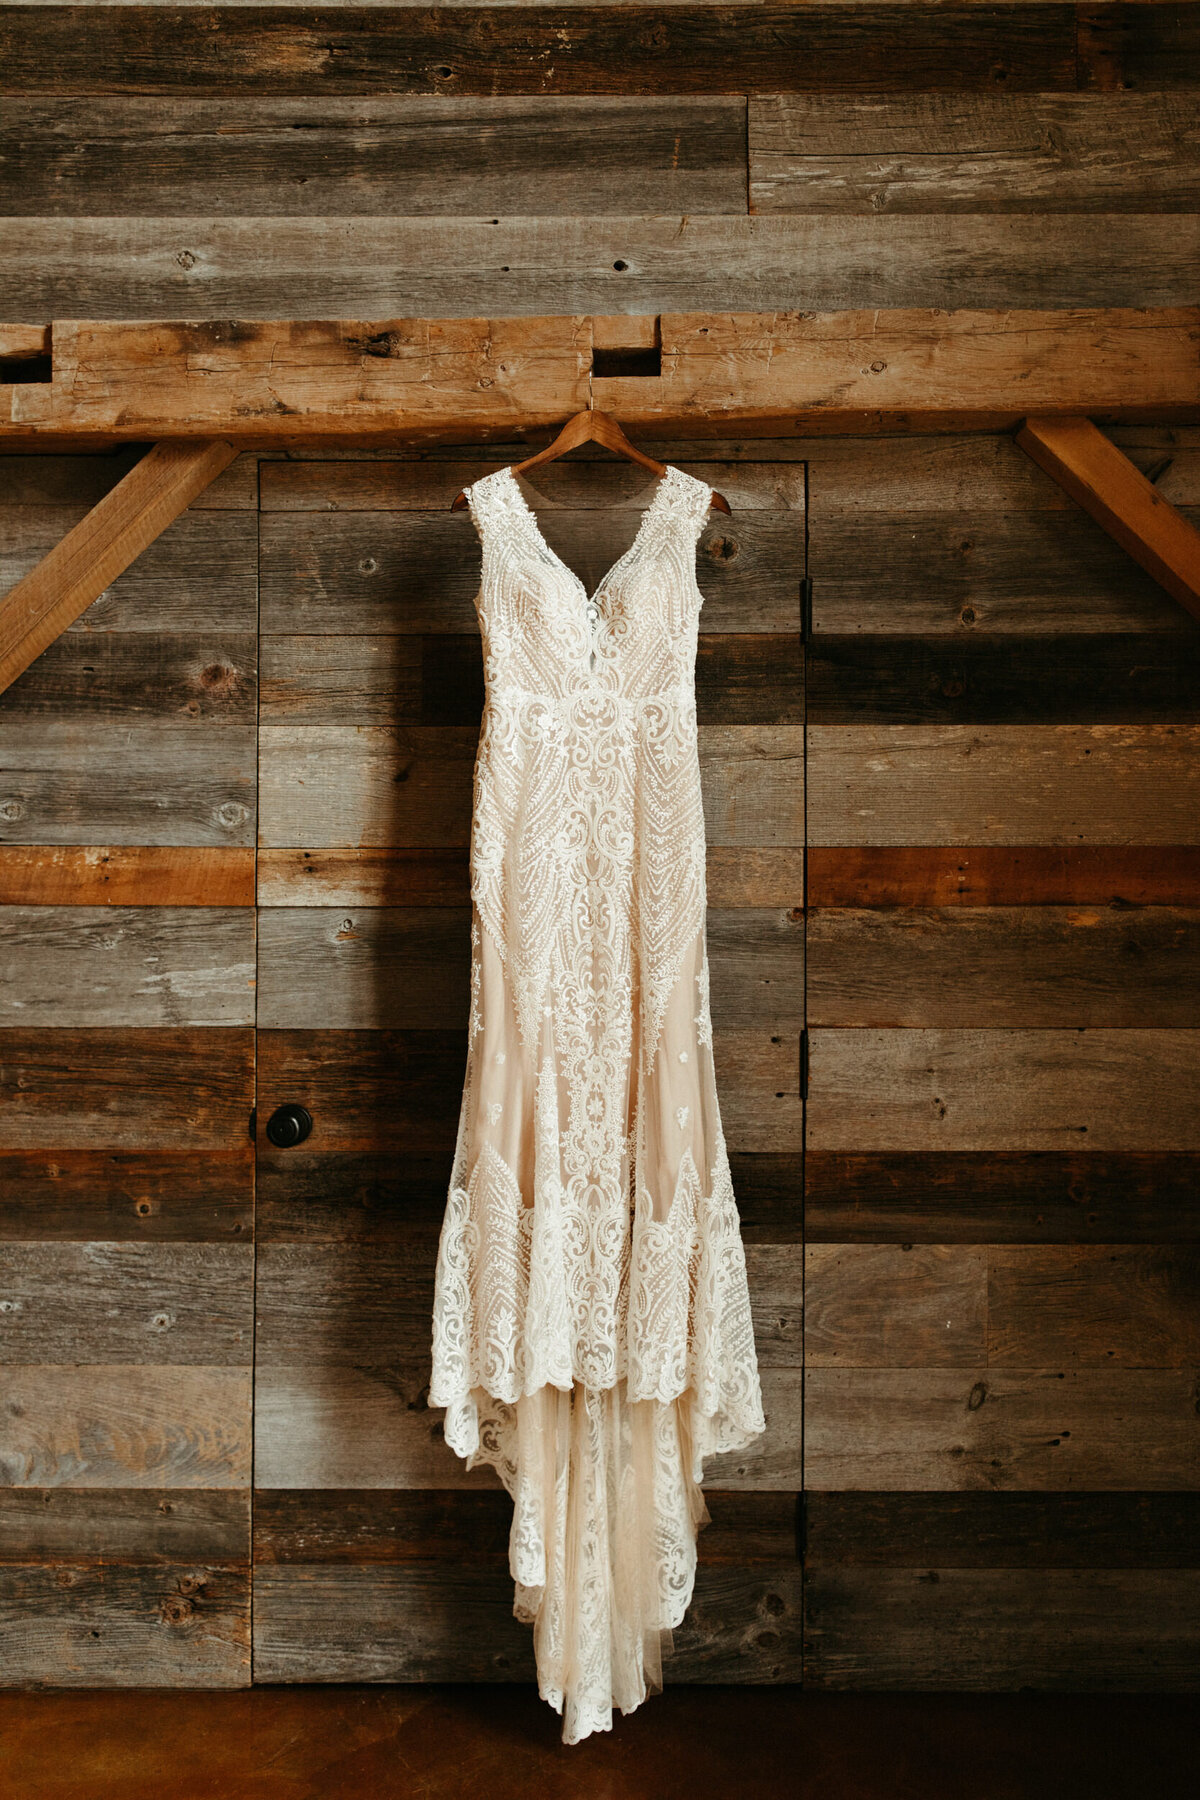 Vintage wedding dress hanging on wooden wall